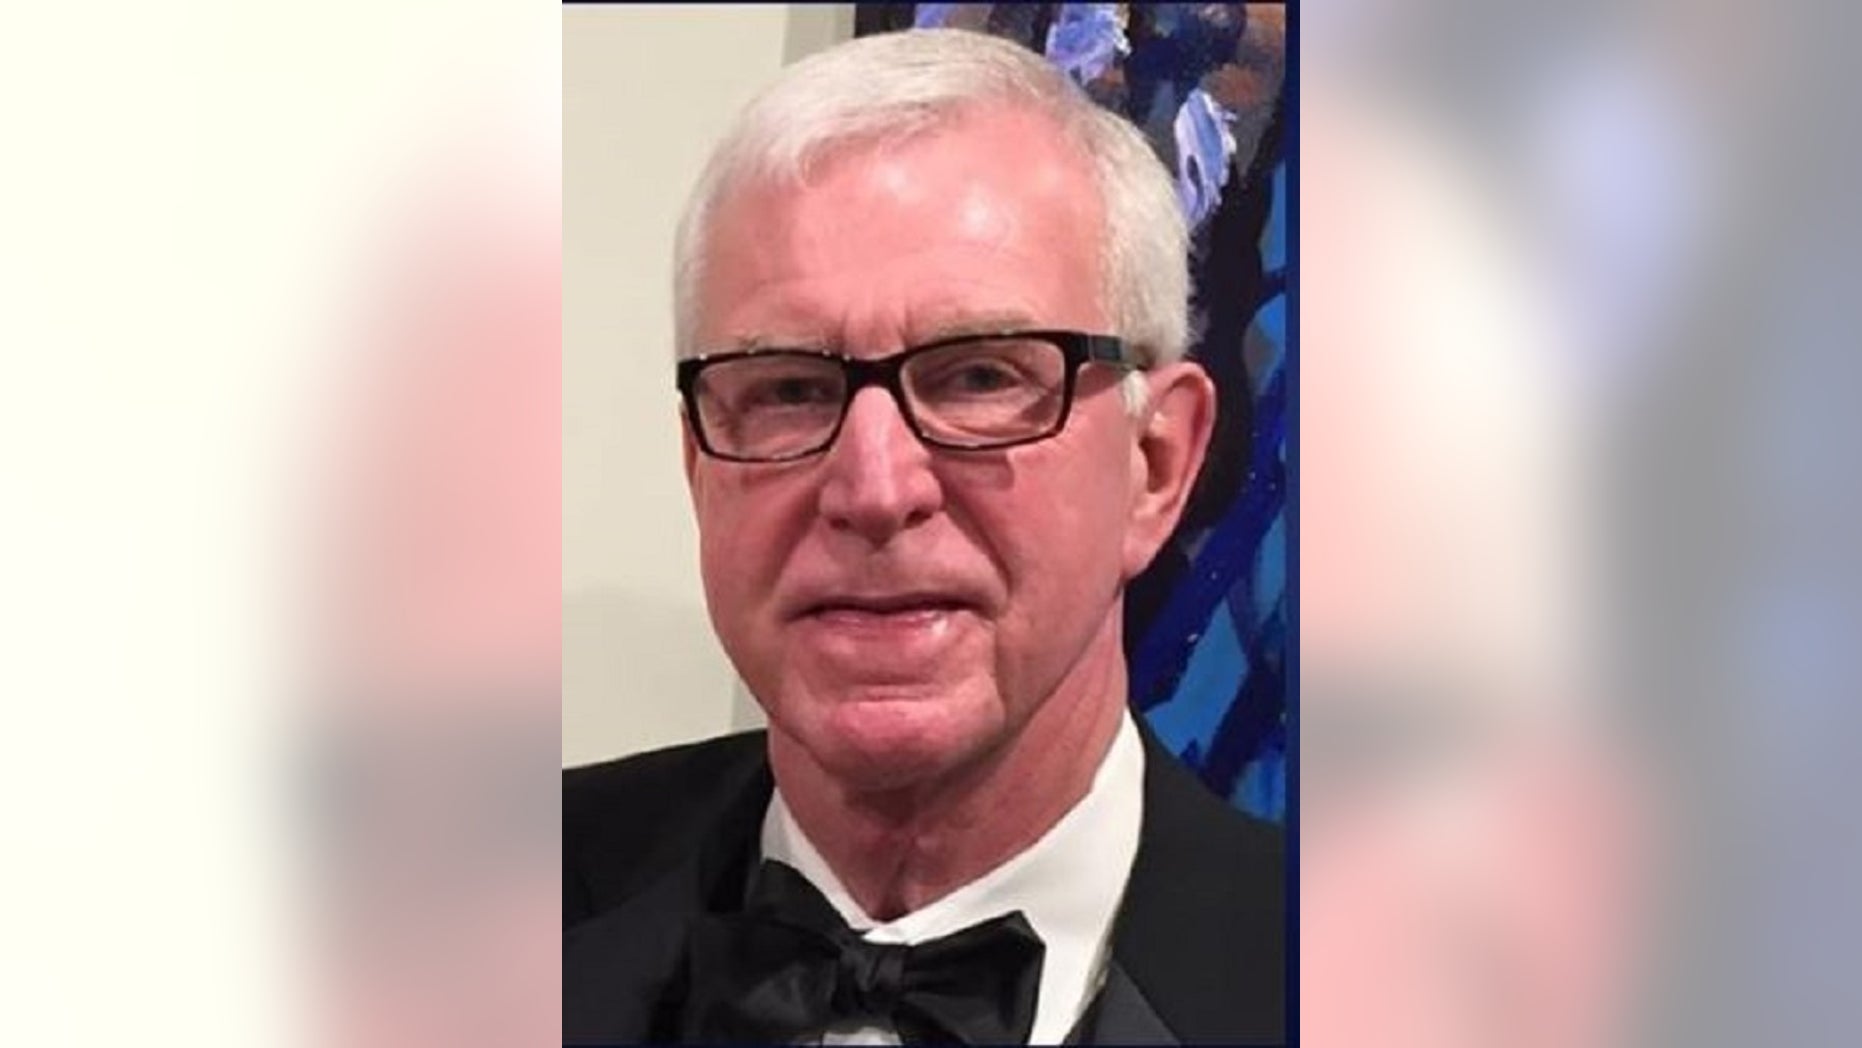   Jack Hough, 73, a veteran of the Air Force, was killed in an attempted car theft, authorities said. (Facebook) 